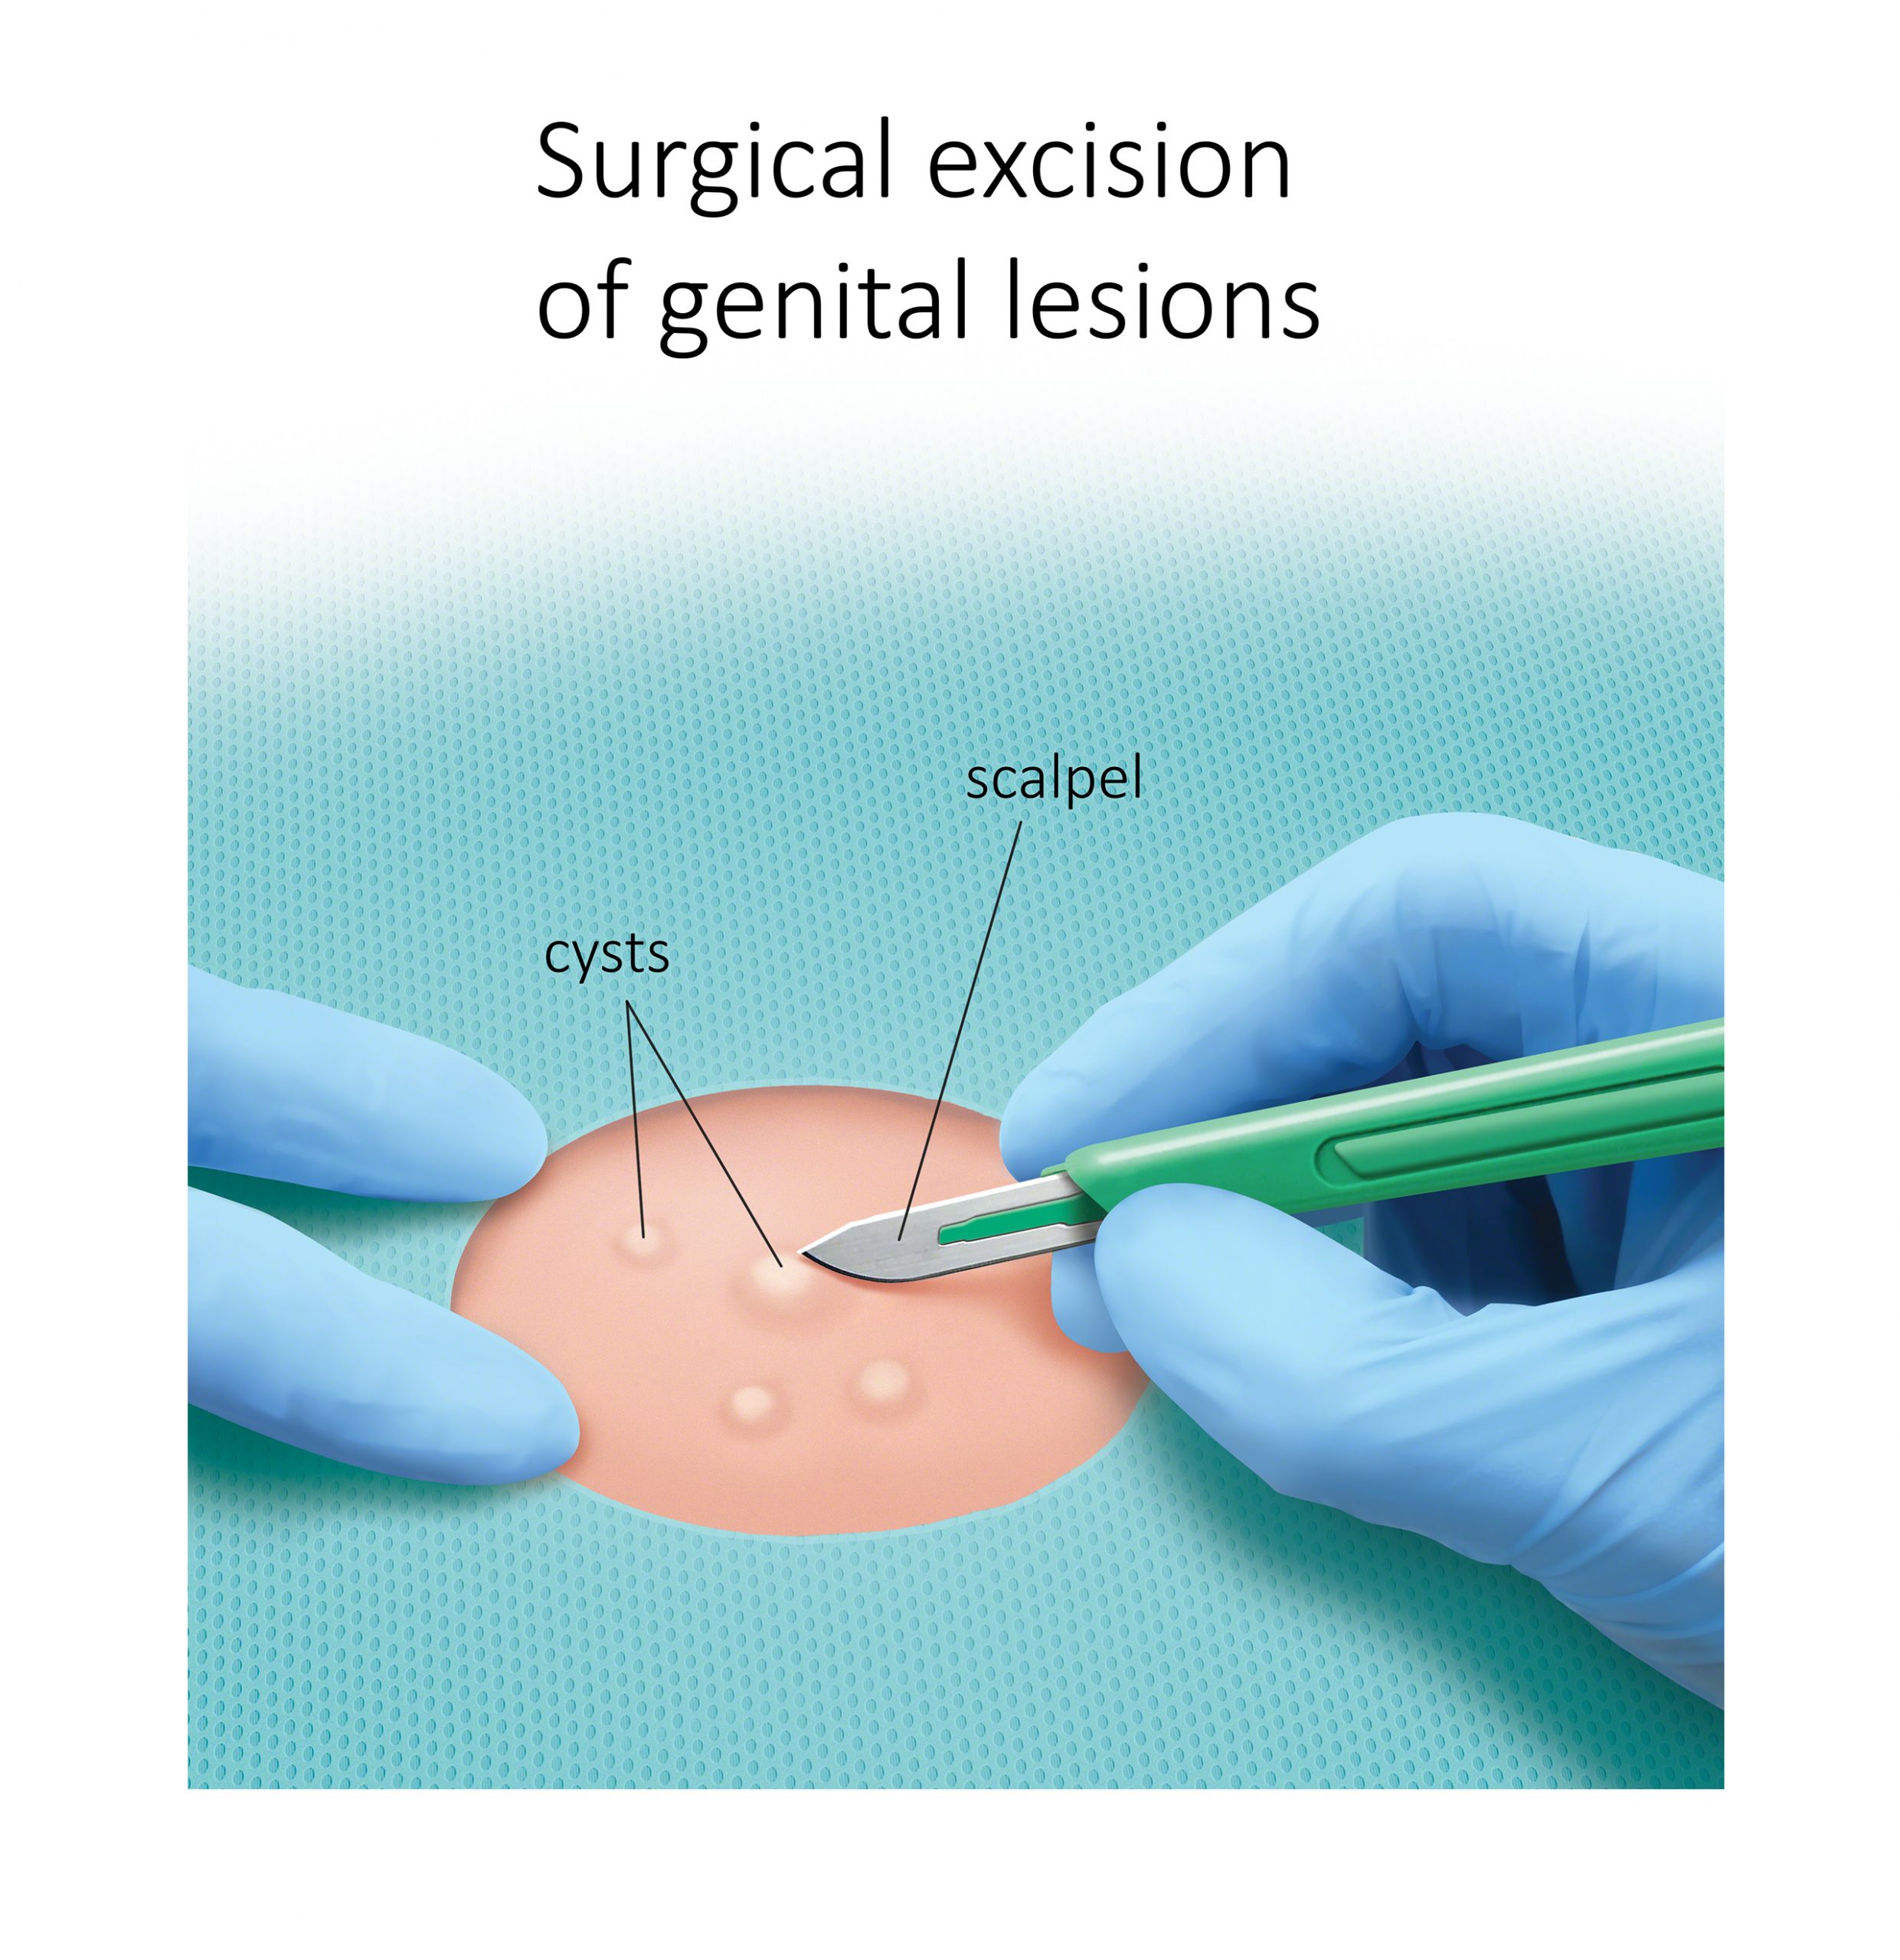 Surgical excision of genital lesions